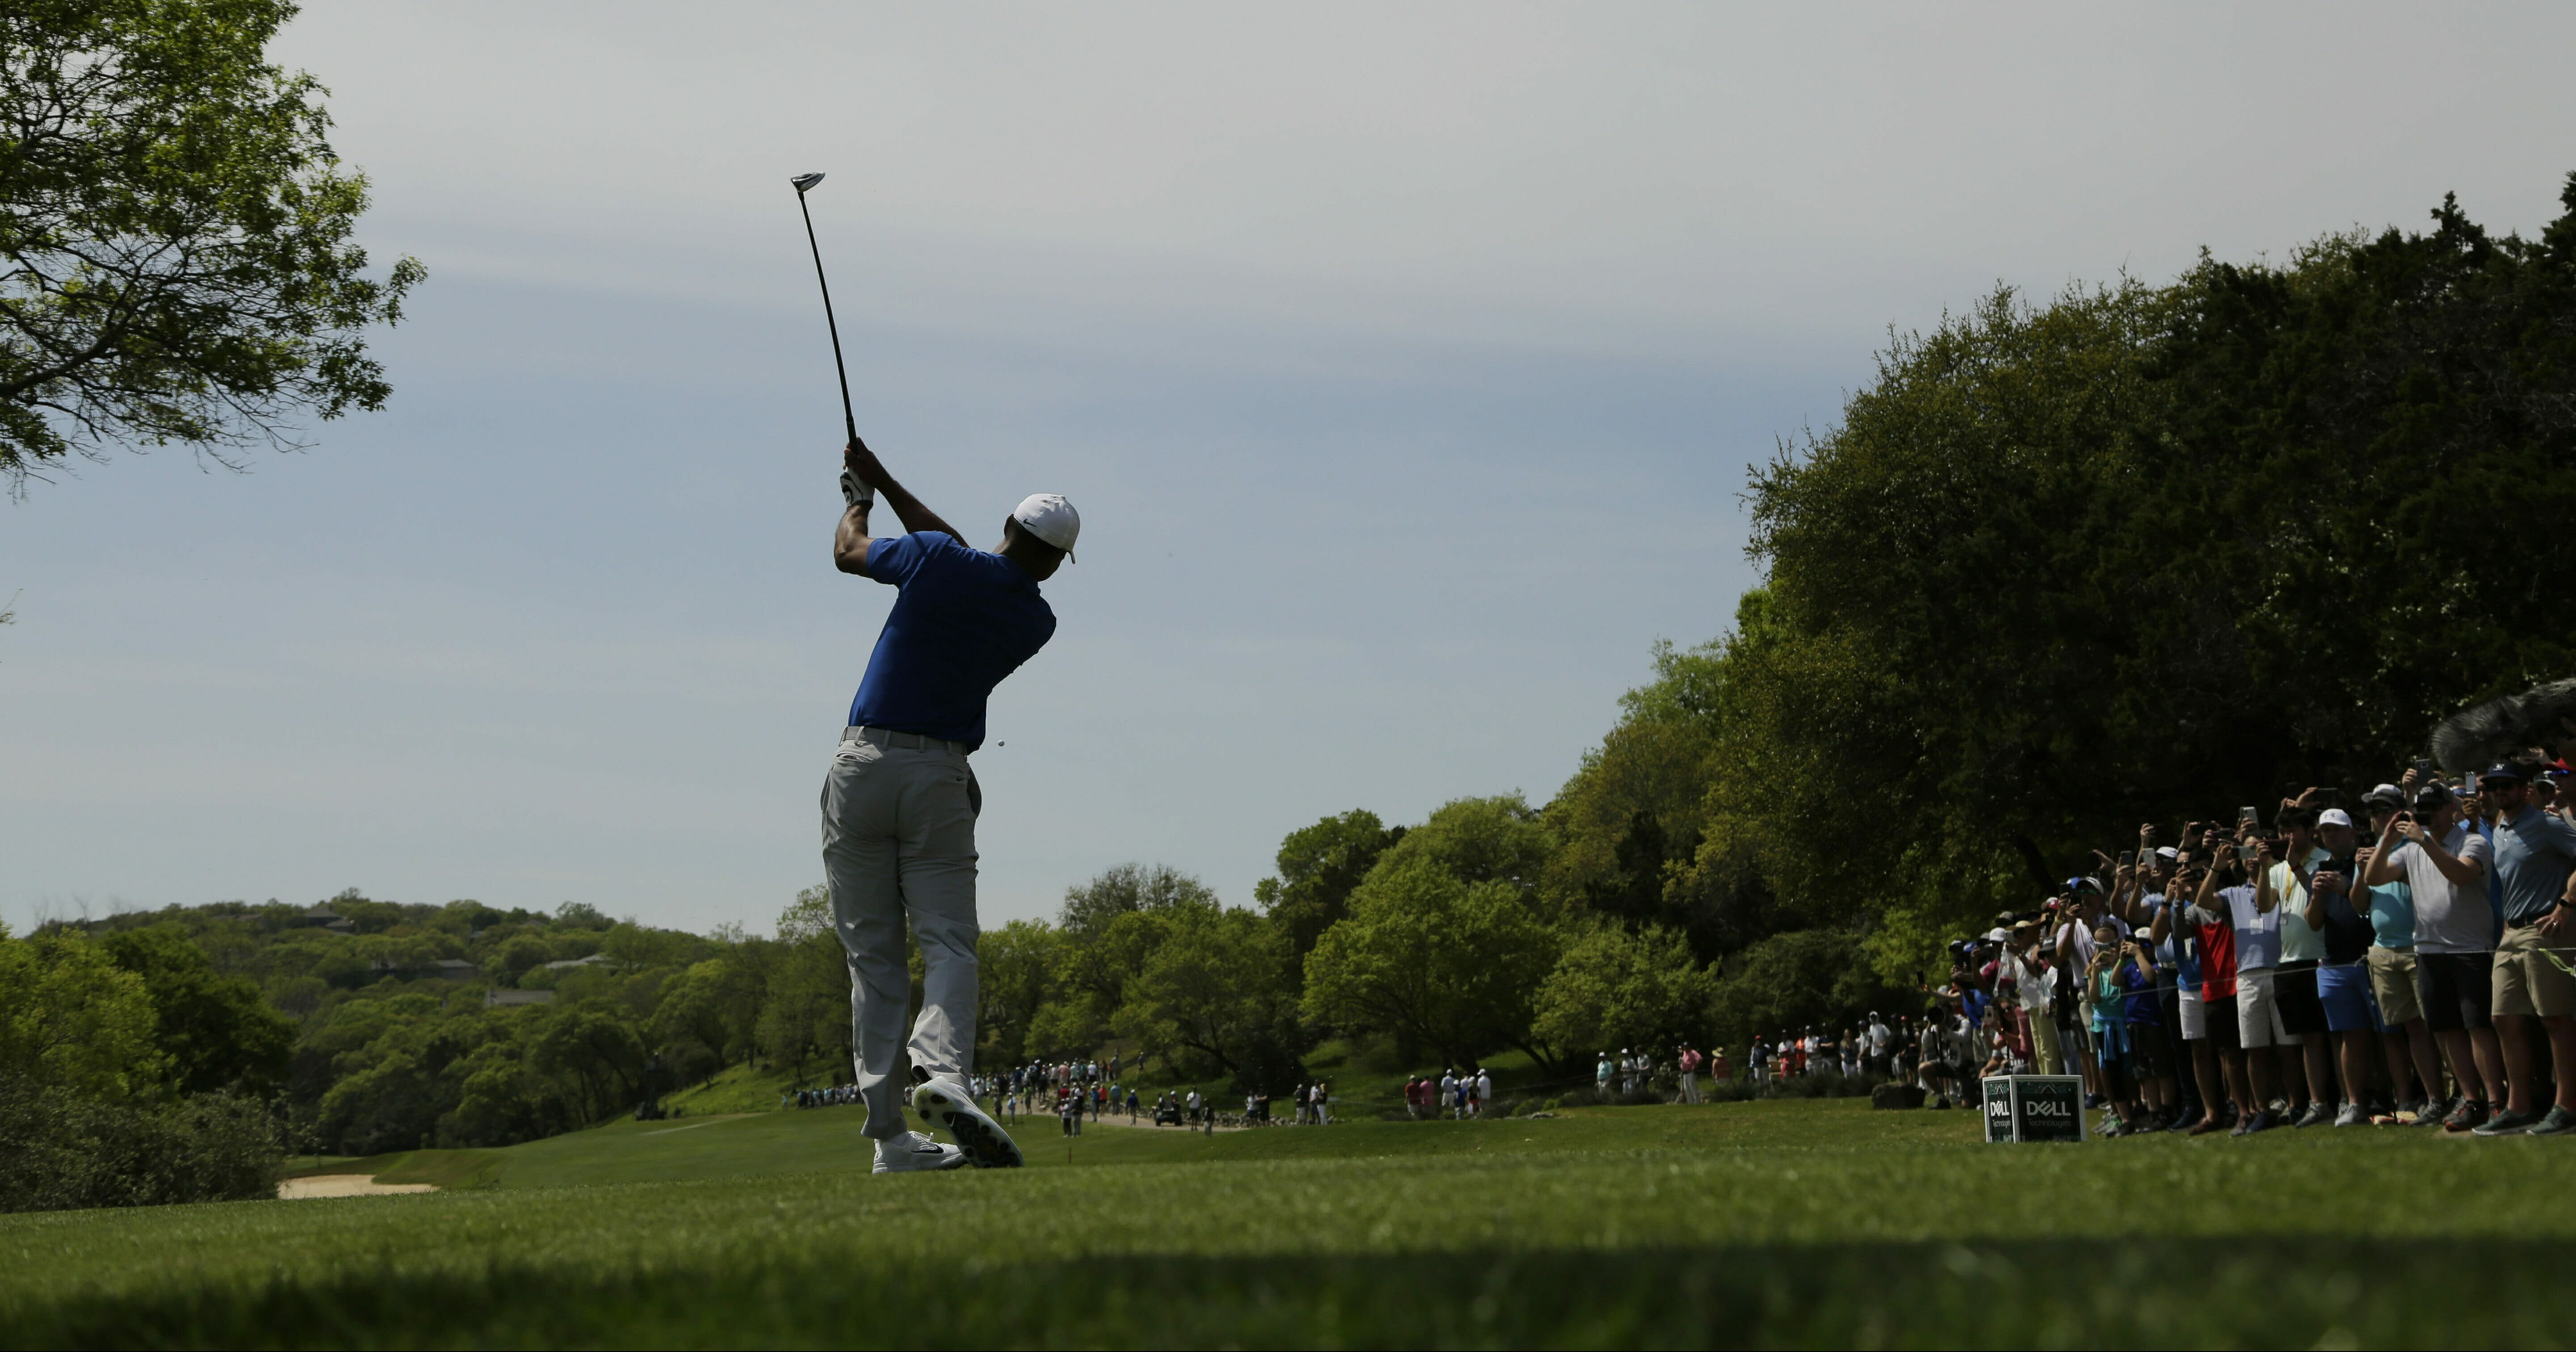 Tiger Woods hits his drive from the third tee during round-robin play at the Dell Match Play Championship golf tournament March 27, 2019, in Austin, Texas.